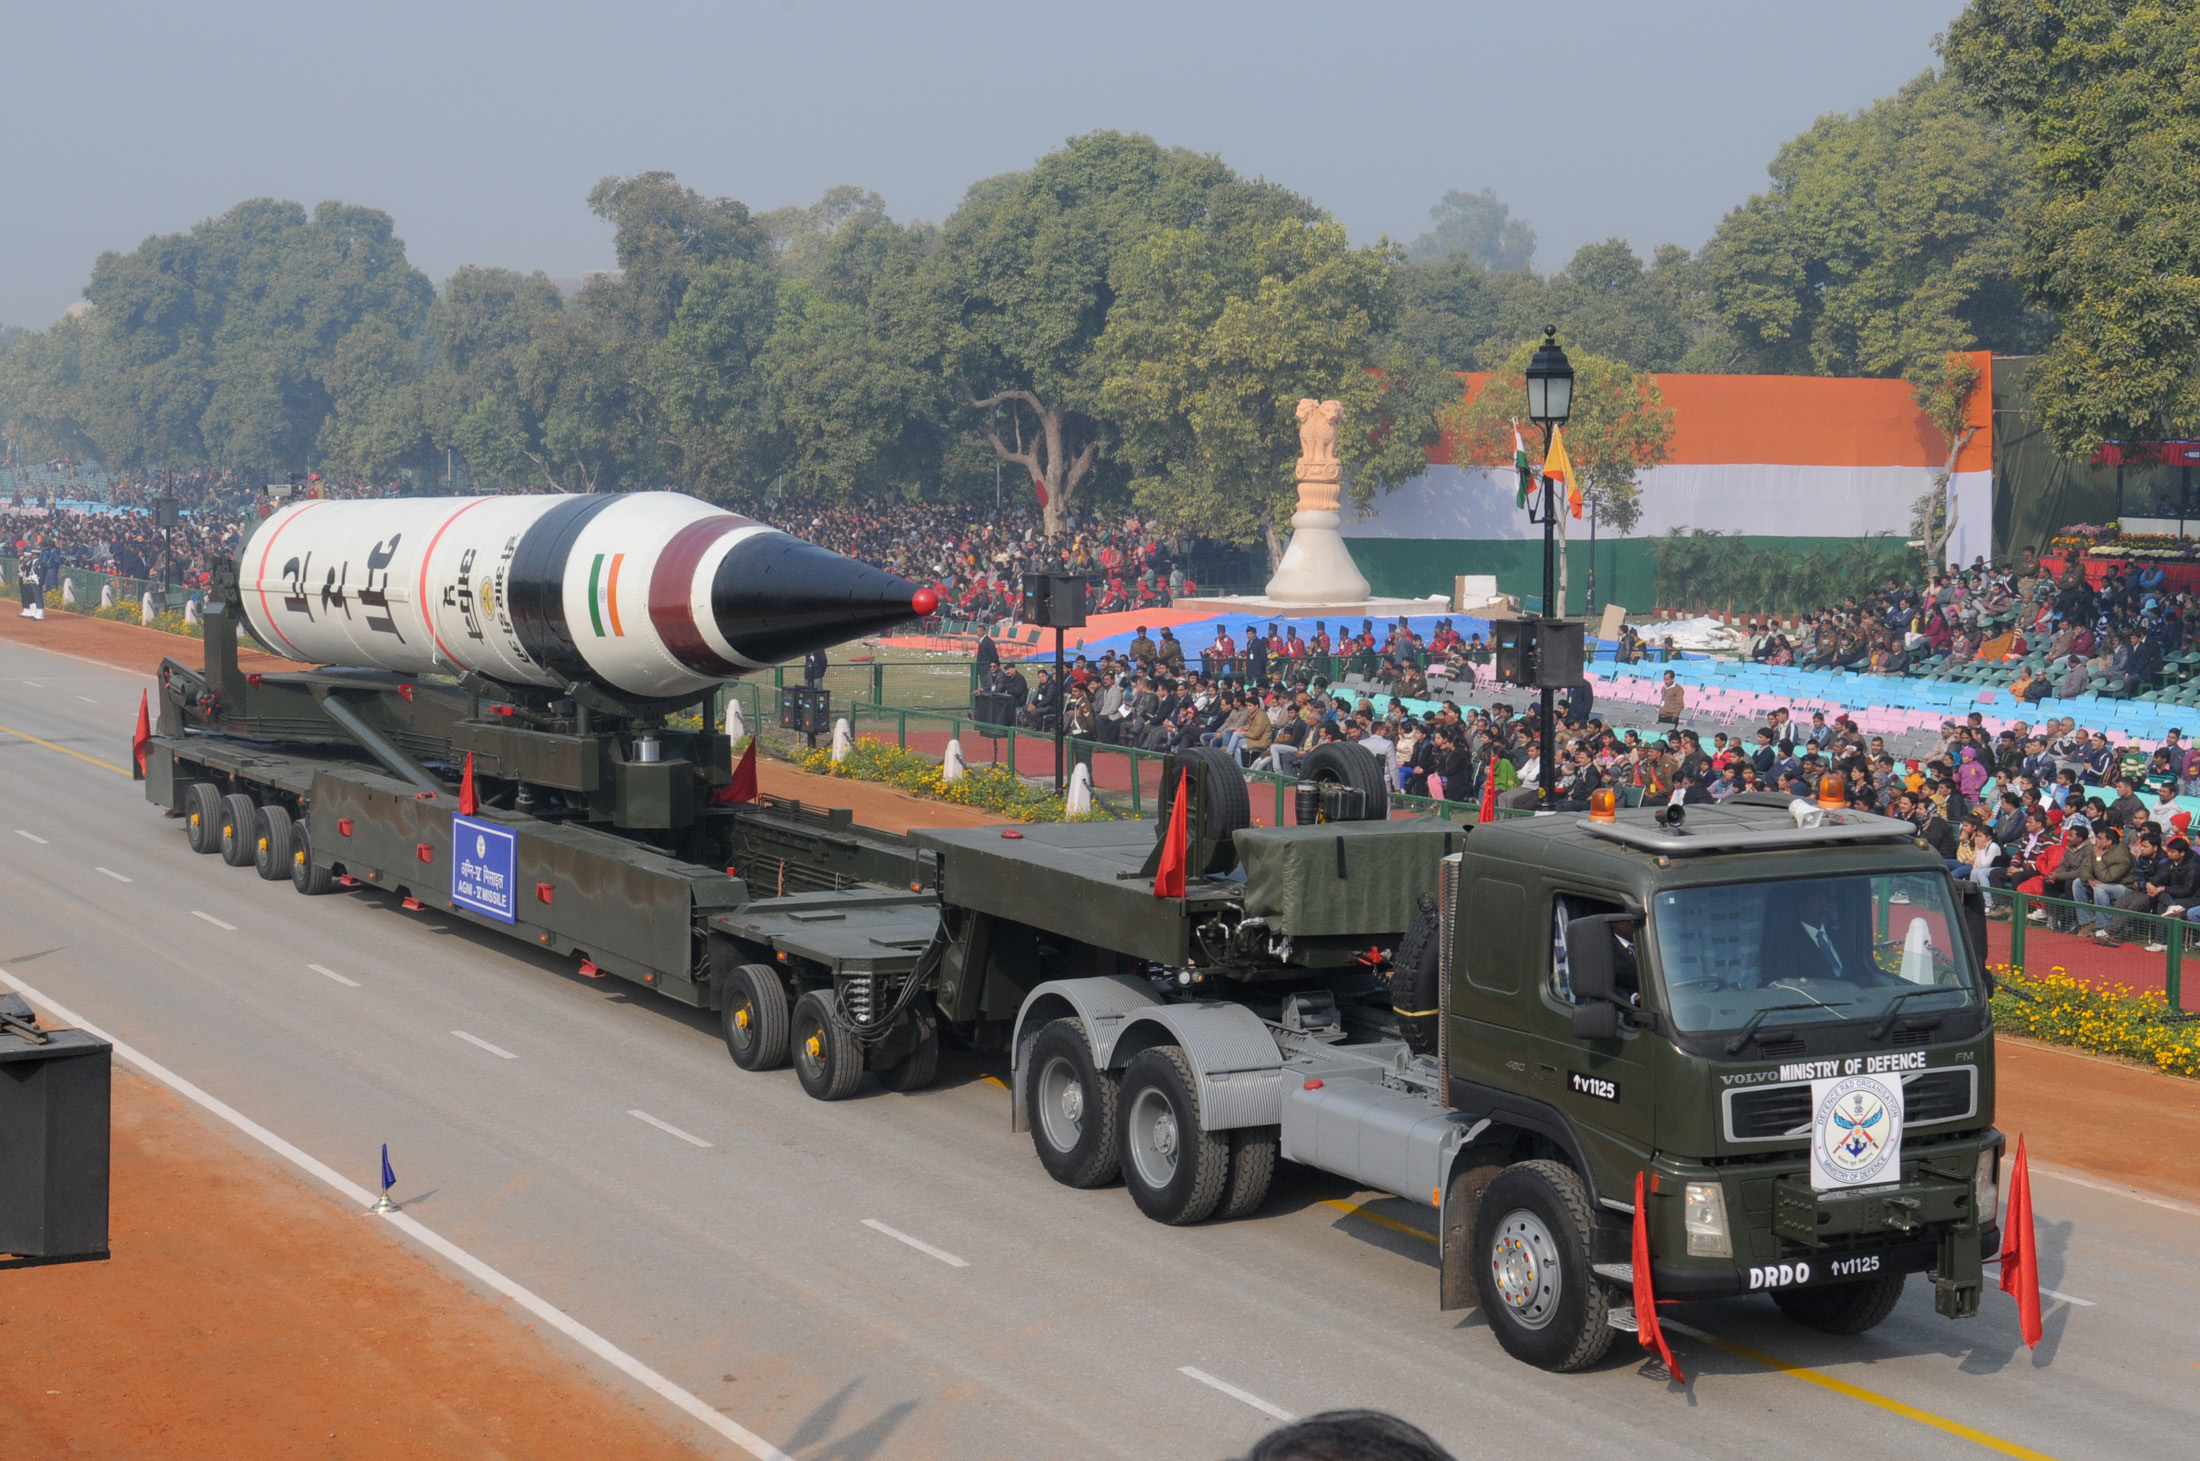 Agni-V_missile_during_rehearsal_of_Republic_Day_Parade_2013.jpg